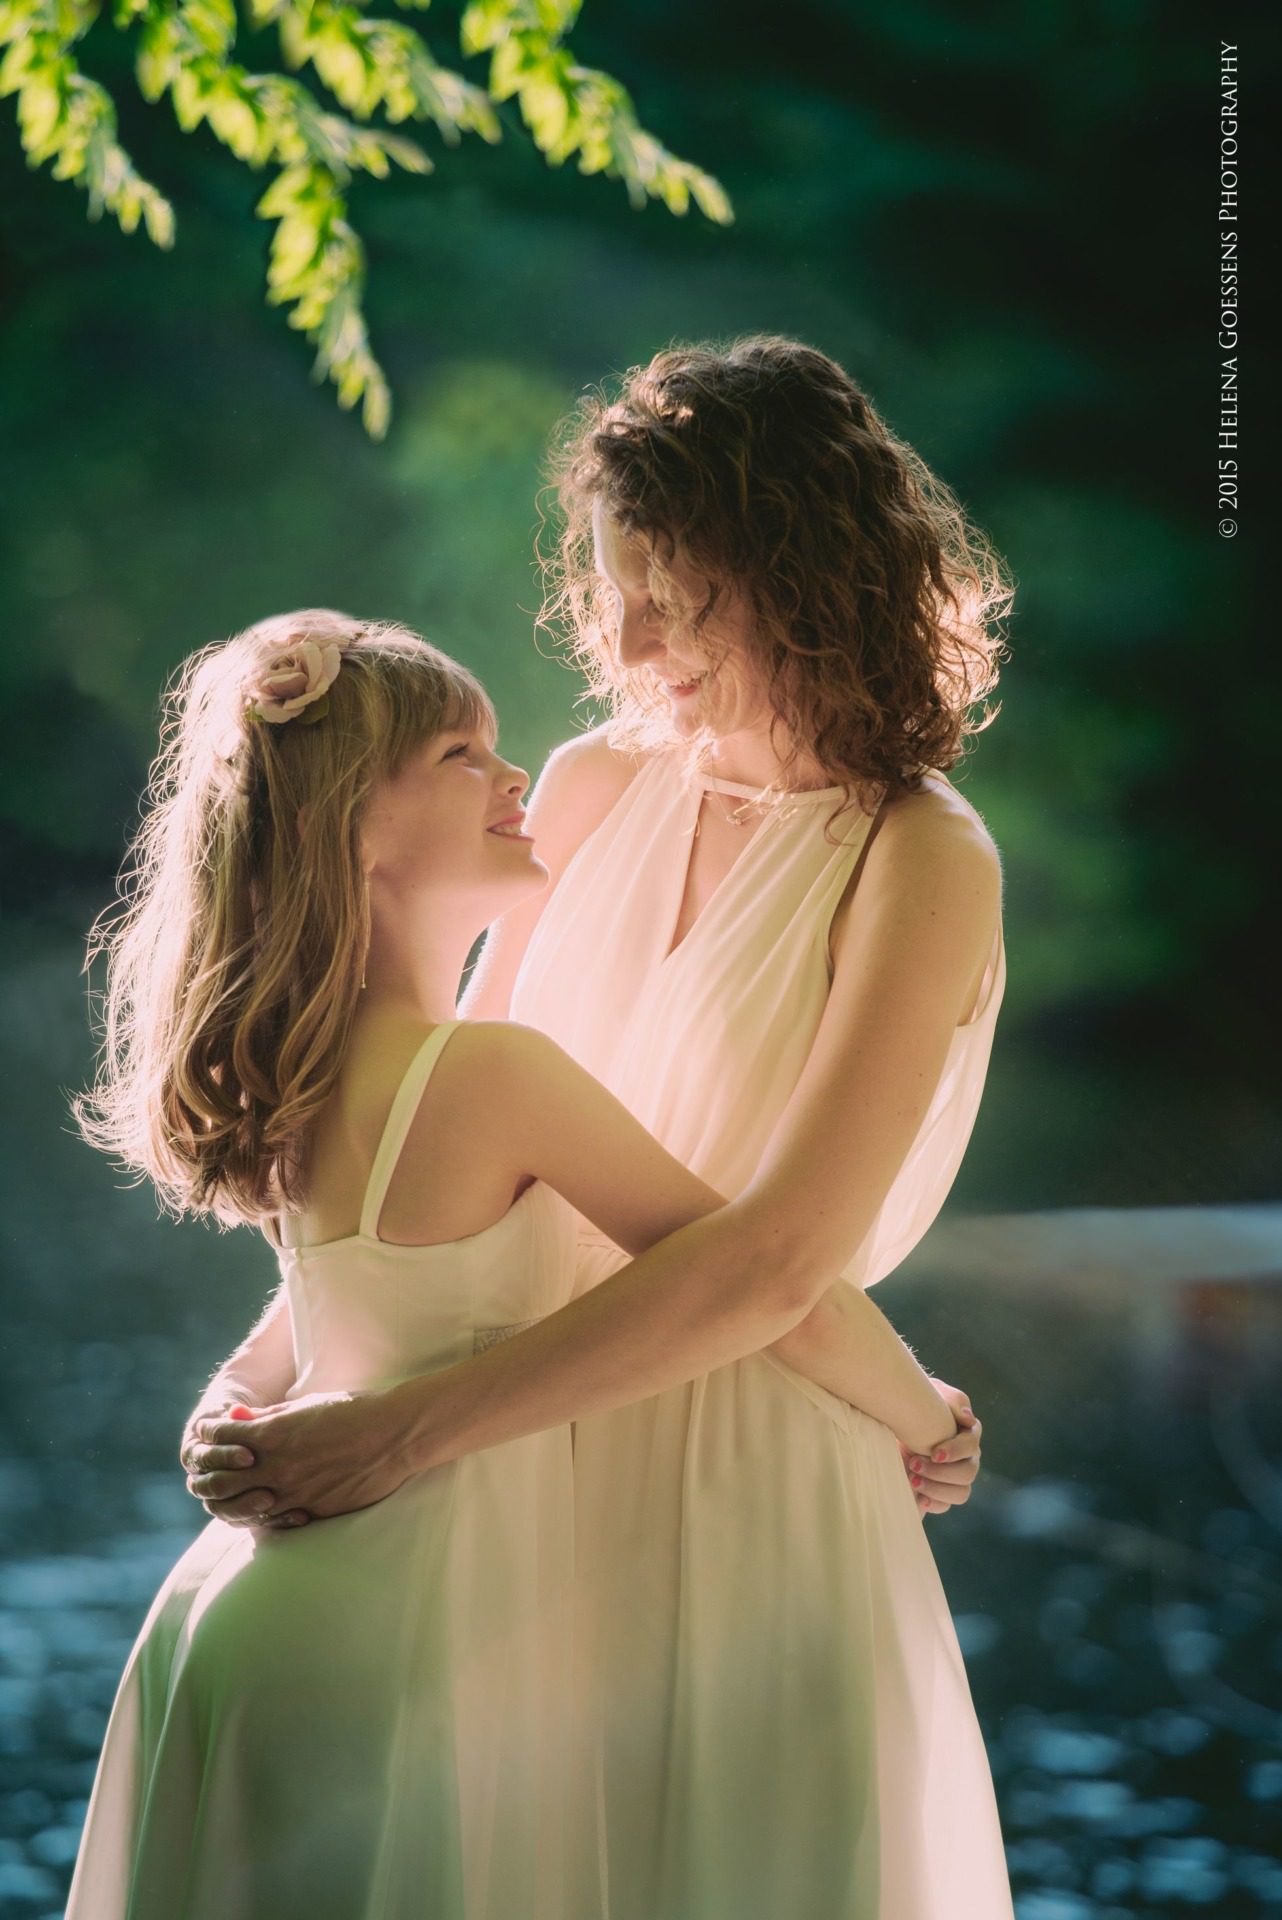 Mother-Daughter photo session in white dresses holding each other in the woods